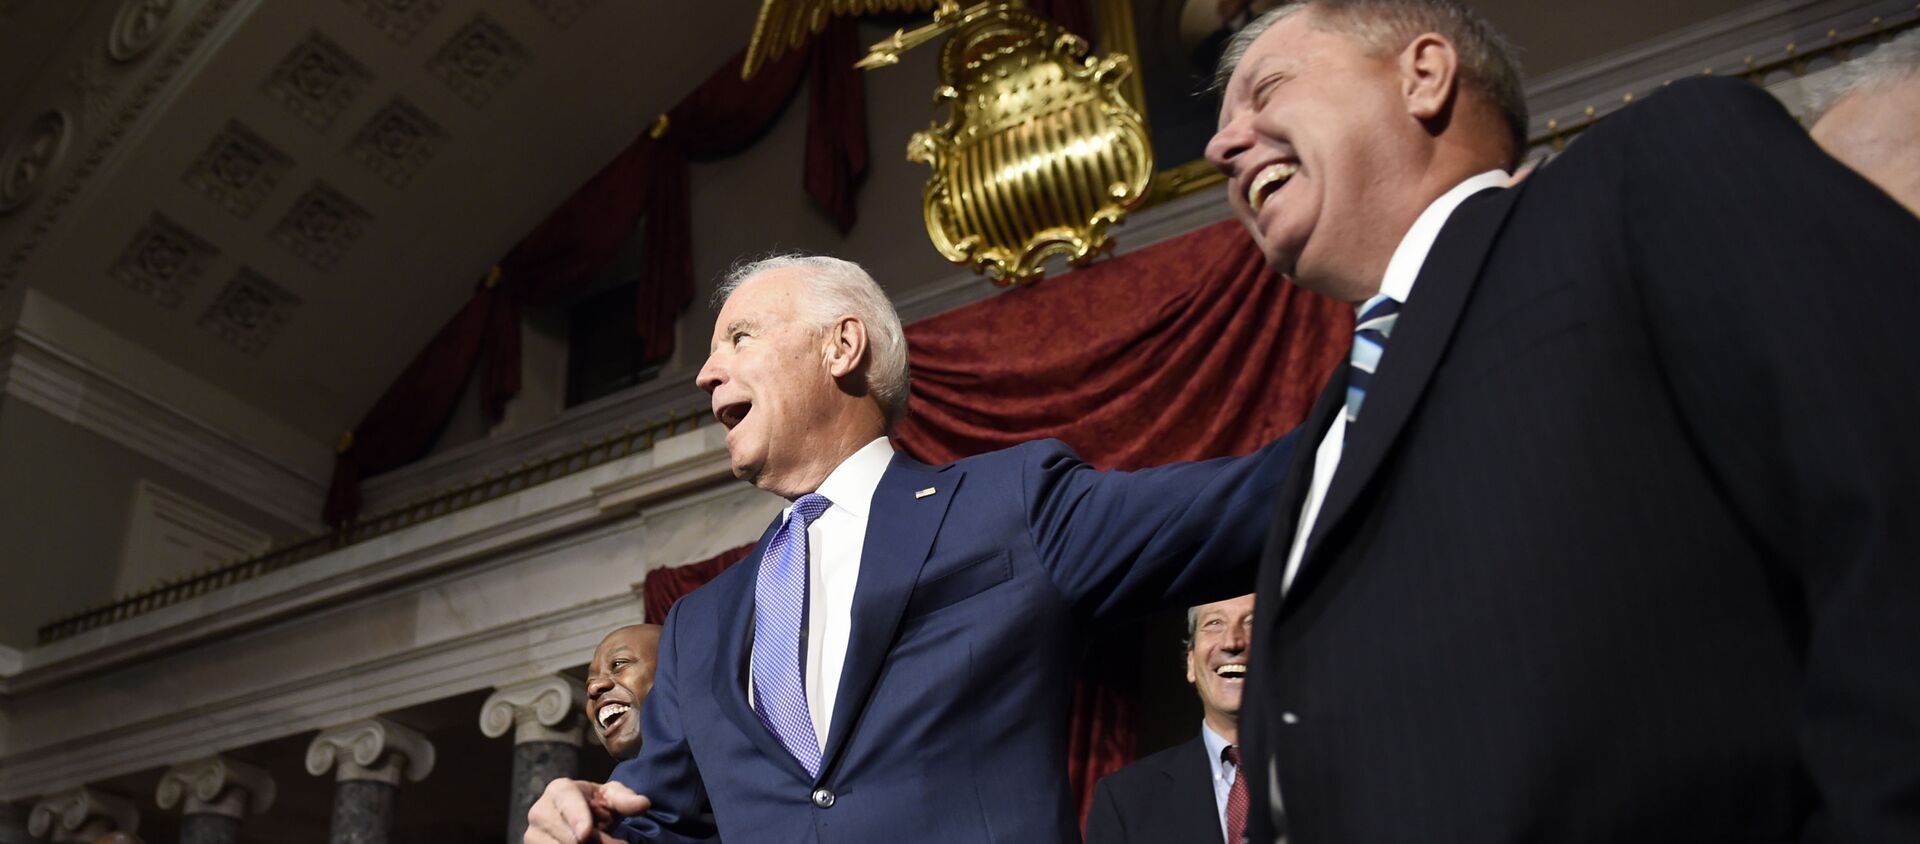 Vice President Joe Biden shares a laugh with Sen. Lindsey Graham, R-S.C., right, following a ceremonial swearing-in ceremony for Sen. Tim Scott, D-S.C., left, Tuesday, Dec. 2, 2014, in the Old Senate Chamber on Capitol Hill in Washington. Rep. Mark Sanford, R-S.C., is second from right - Sputnik International, 1920, 16.08.2021